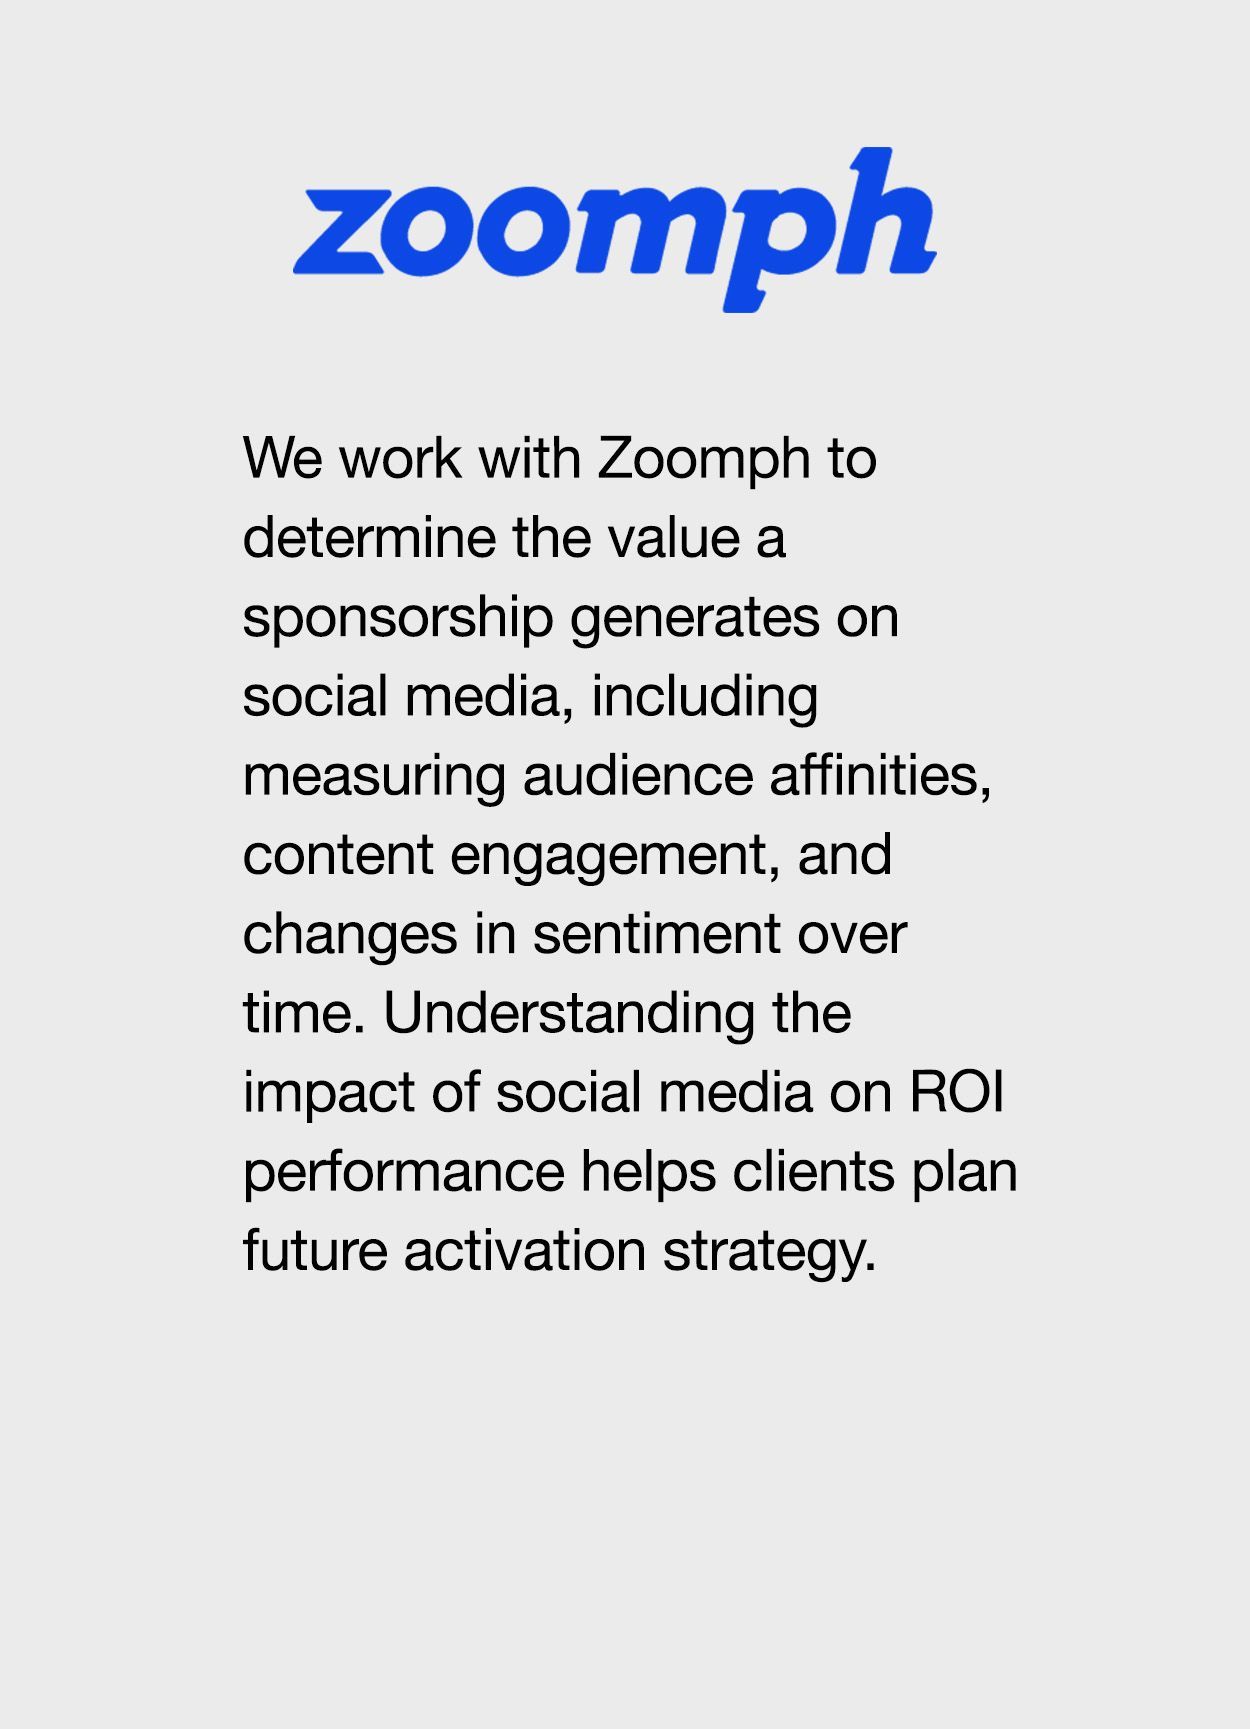 We work with Zoomph to determine the value a sponsorship generates on social media, including measuring audience affinities, content engagement, and changes in sentiment over time. Understanding the impact of social media on ROI performance helps clients plan future activation strategy.